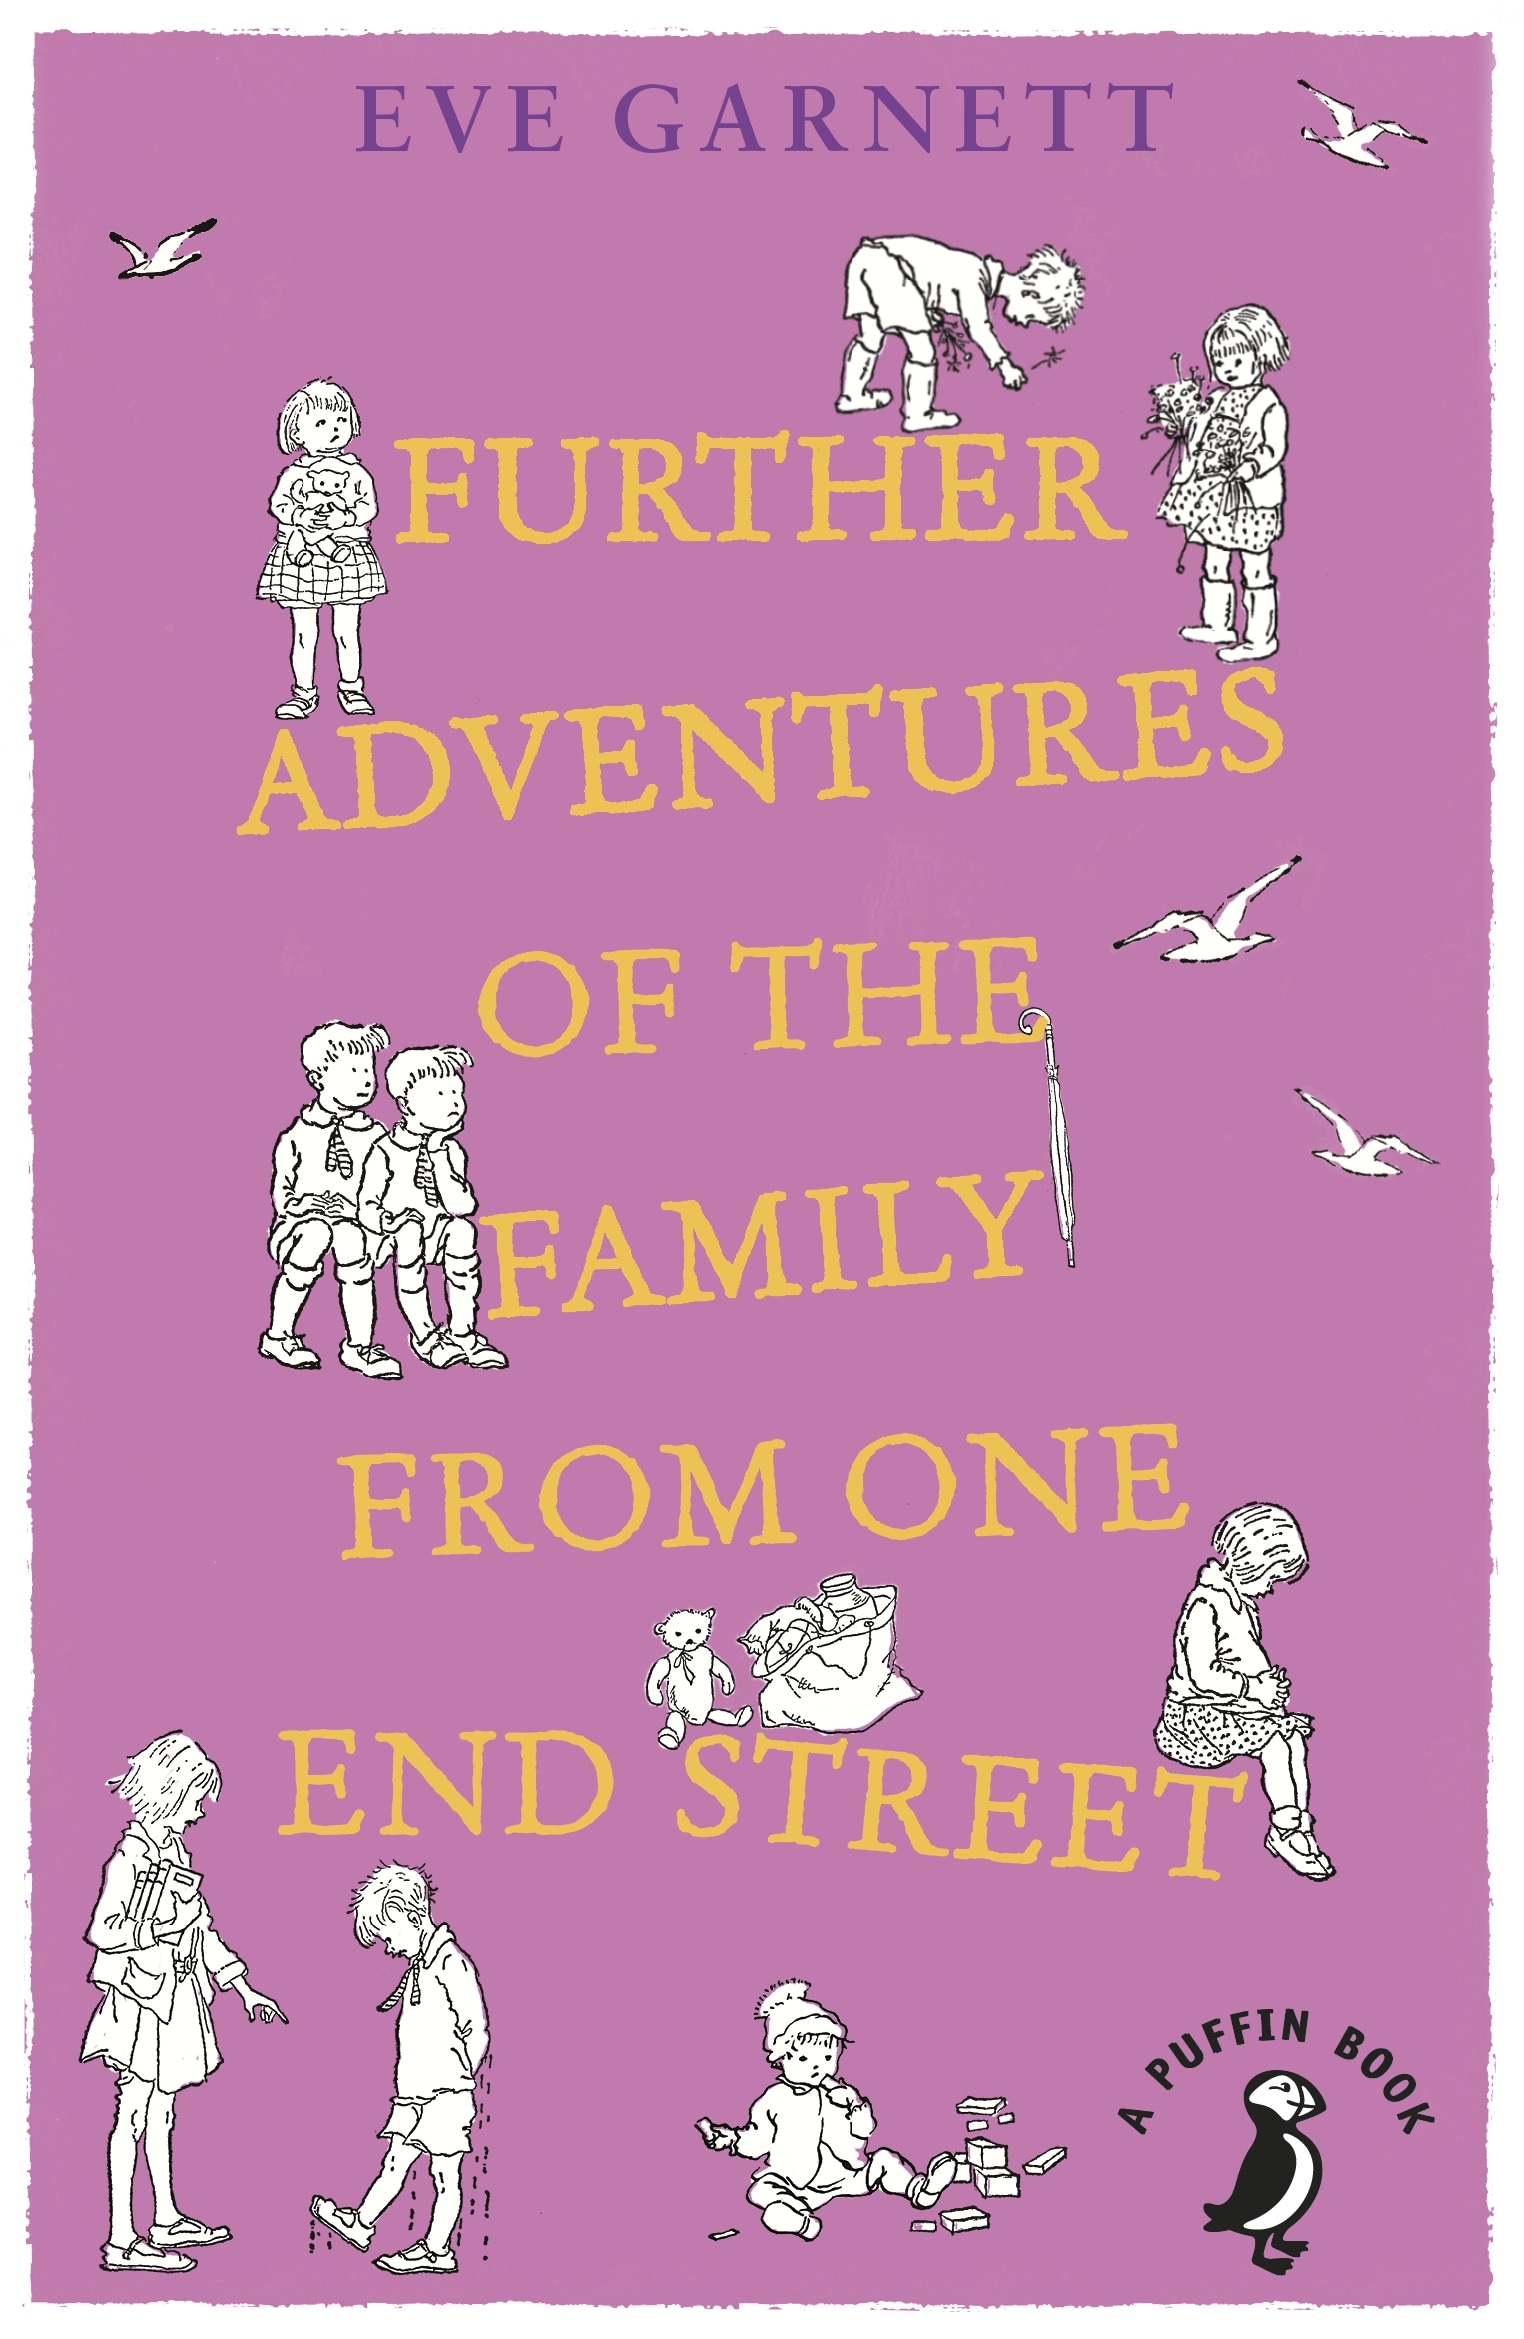 Book “Further Adventures of the Family from One End Street” by Eve Garnett — June 6, 2019